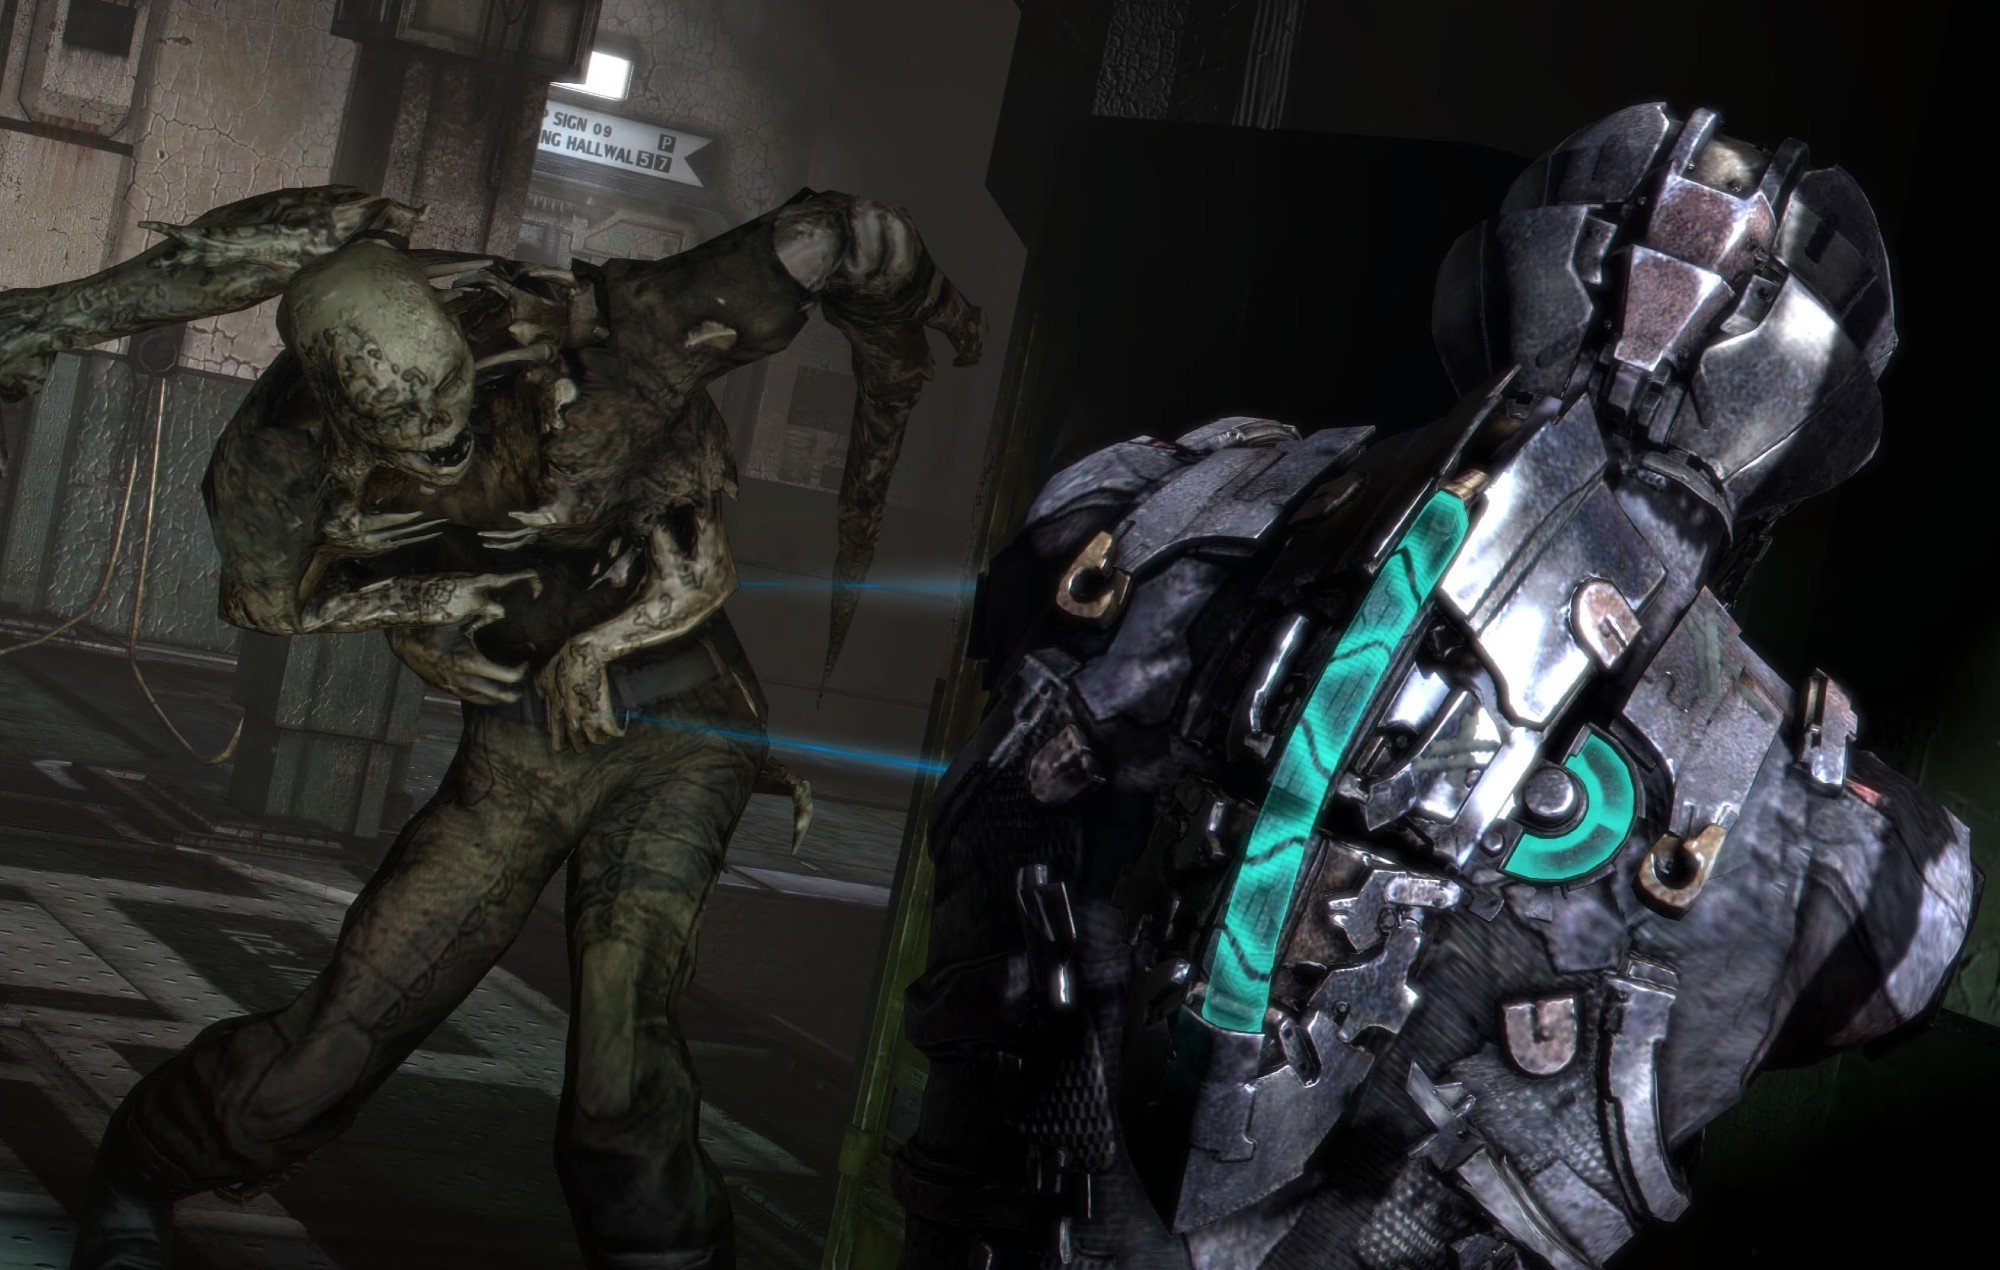 ‘Dead Space 3’ writer would “redo the entire story” if he had the chance